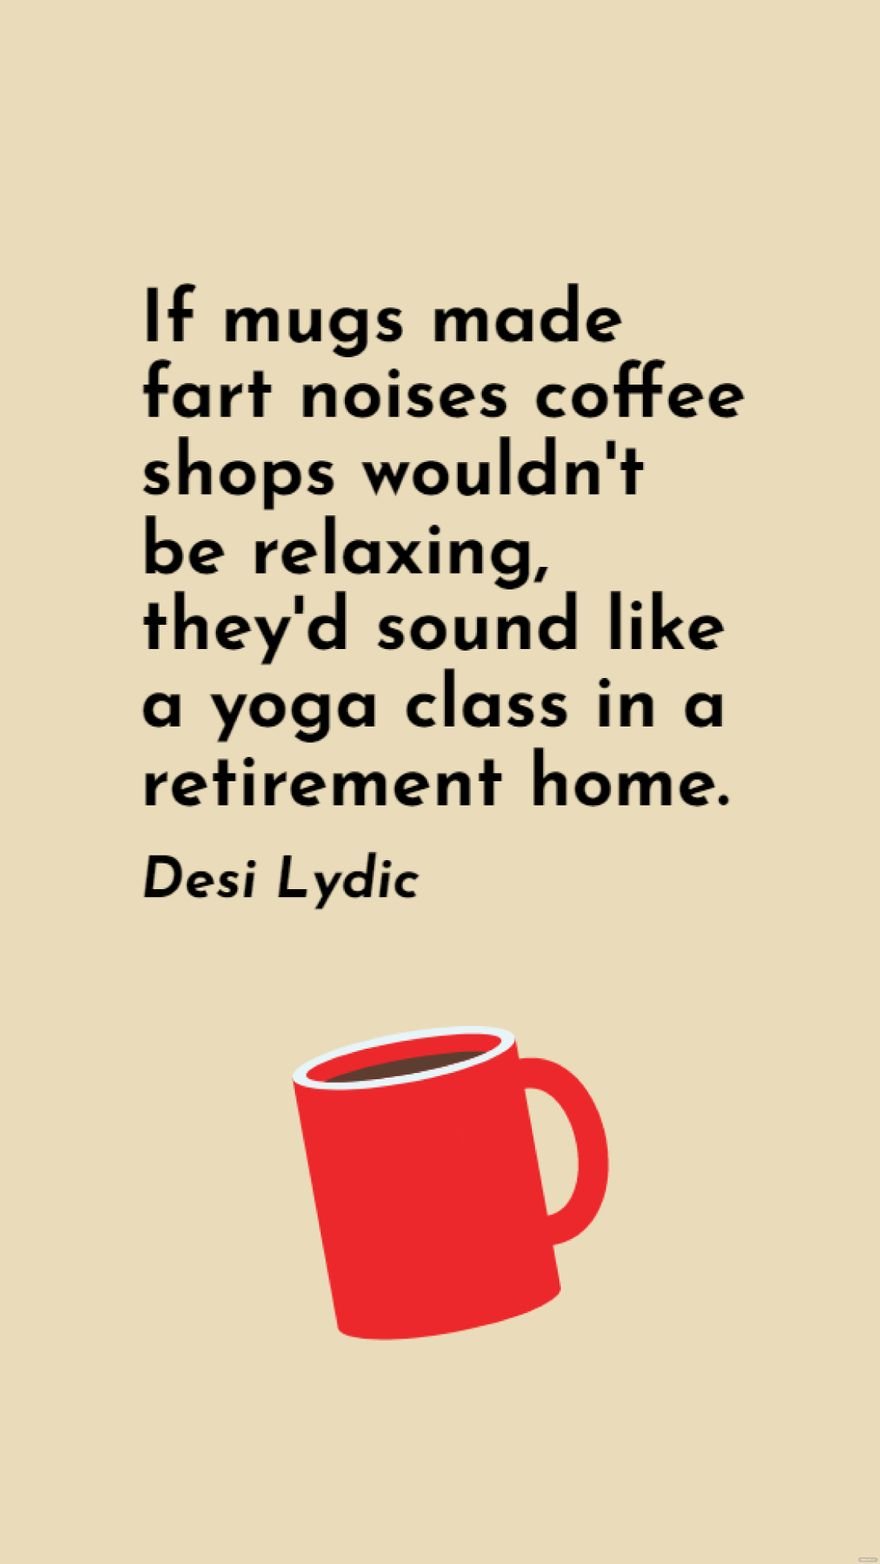 Desi Lydic - If mugs made fart noises coffee shops wouldn't be relaxing, they'd sound like a yoga class in a retirement home. in JPG